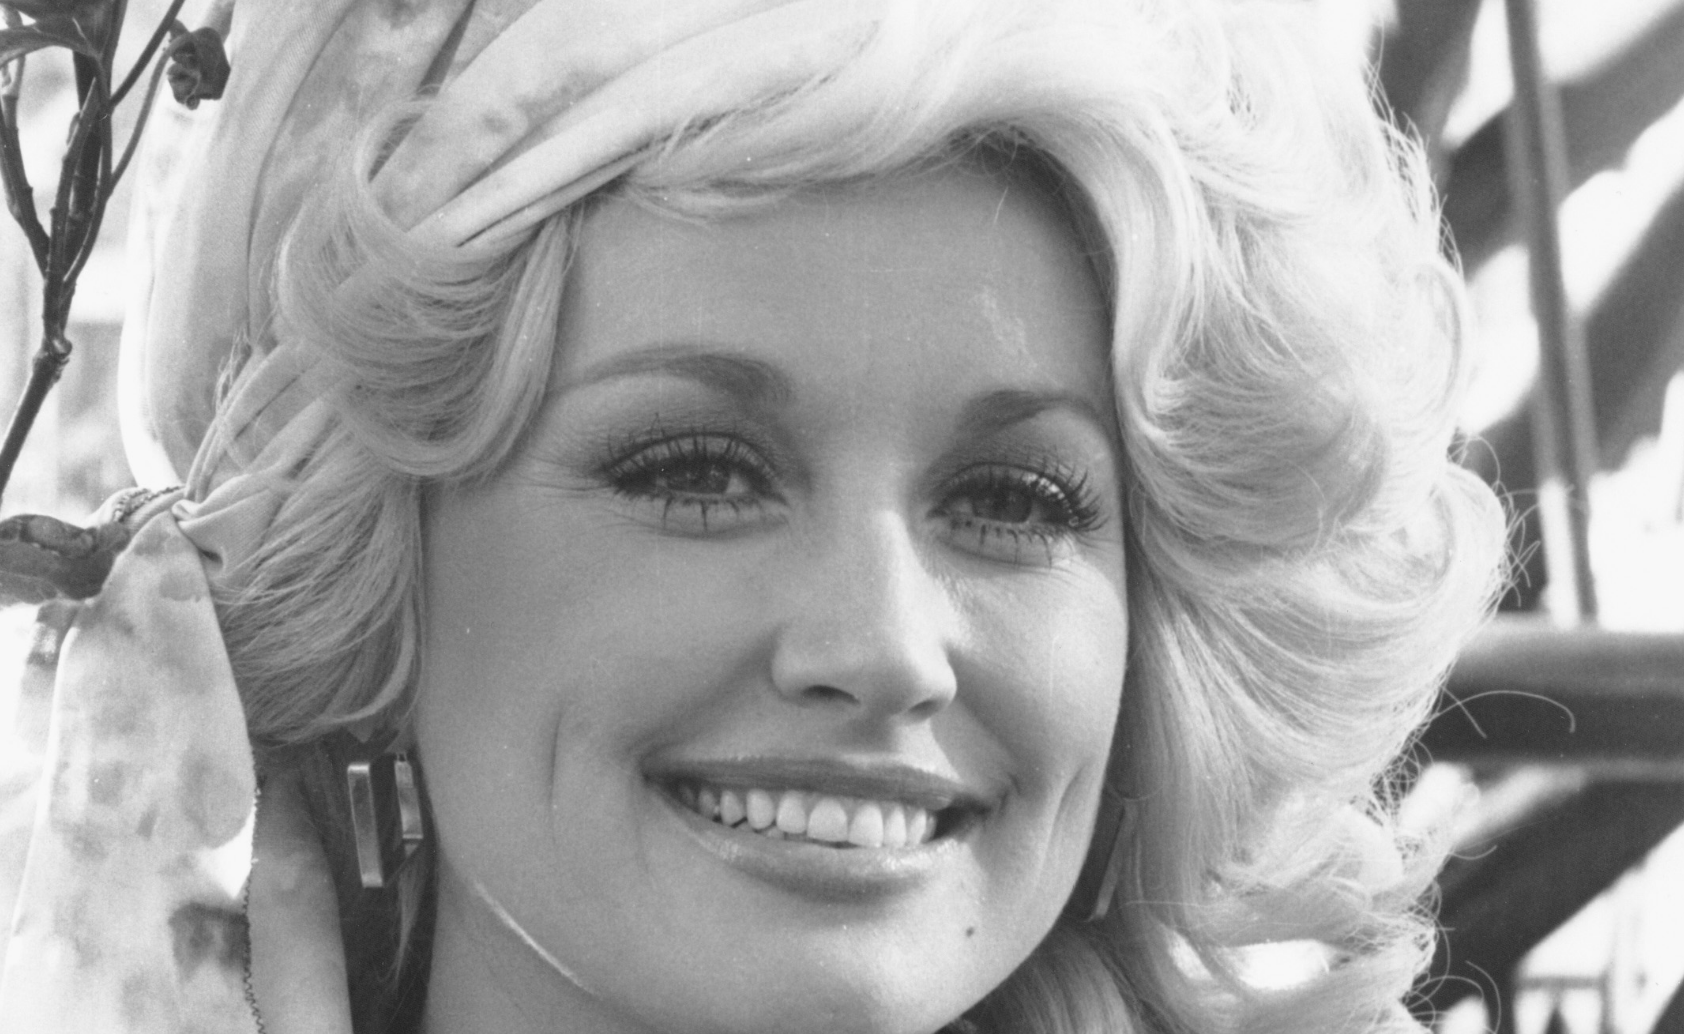 Dolly Parton: Things You Never Knew About Her - The Delite1684 x 1034